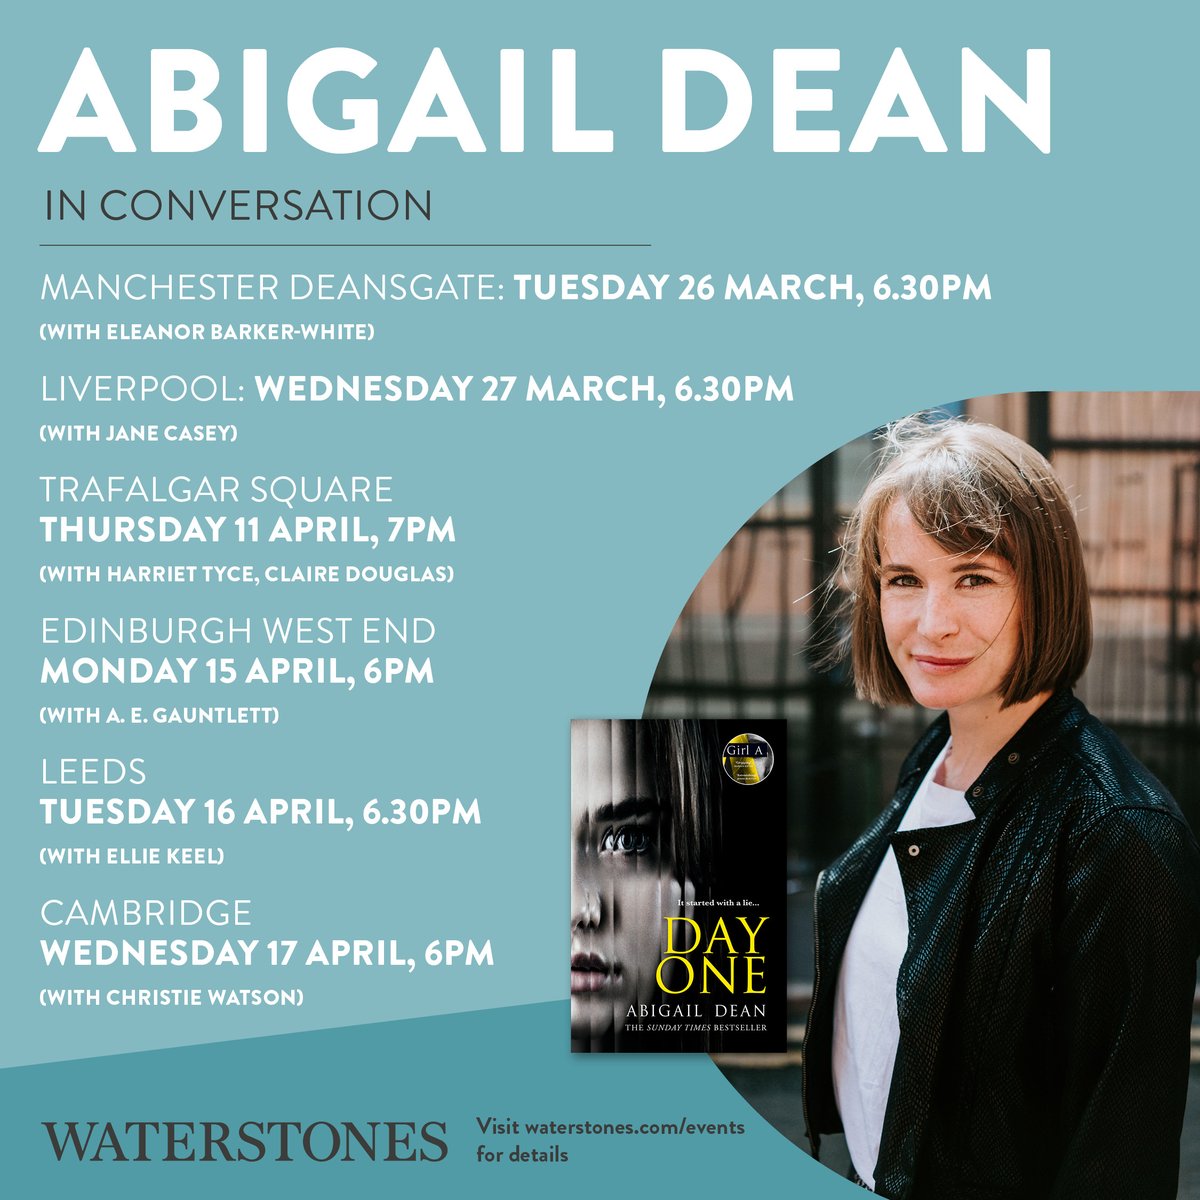 This is your chance to see the global bestselling author, @abigailsdean on her upcoming book tour! Celebrating the launch of her breathtaking new novel, DAY ONE, with a series of events at @Waterstones bookshops across the country. Book your ticket now: waterstones.com/events/search/…